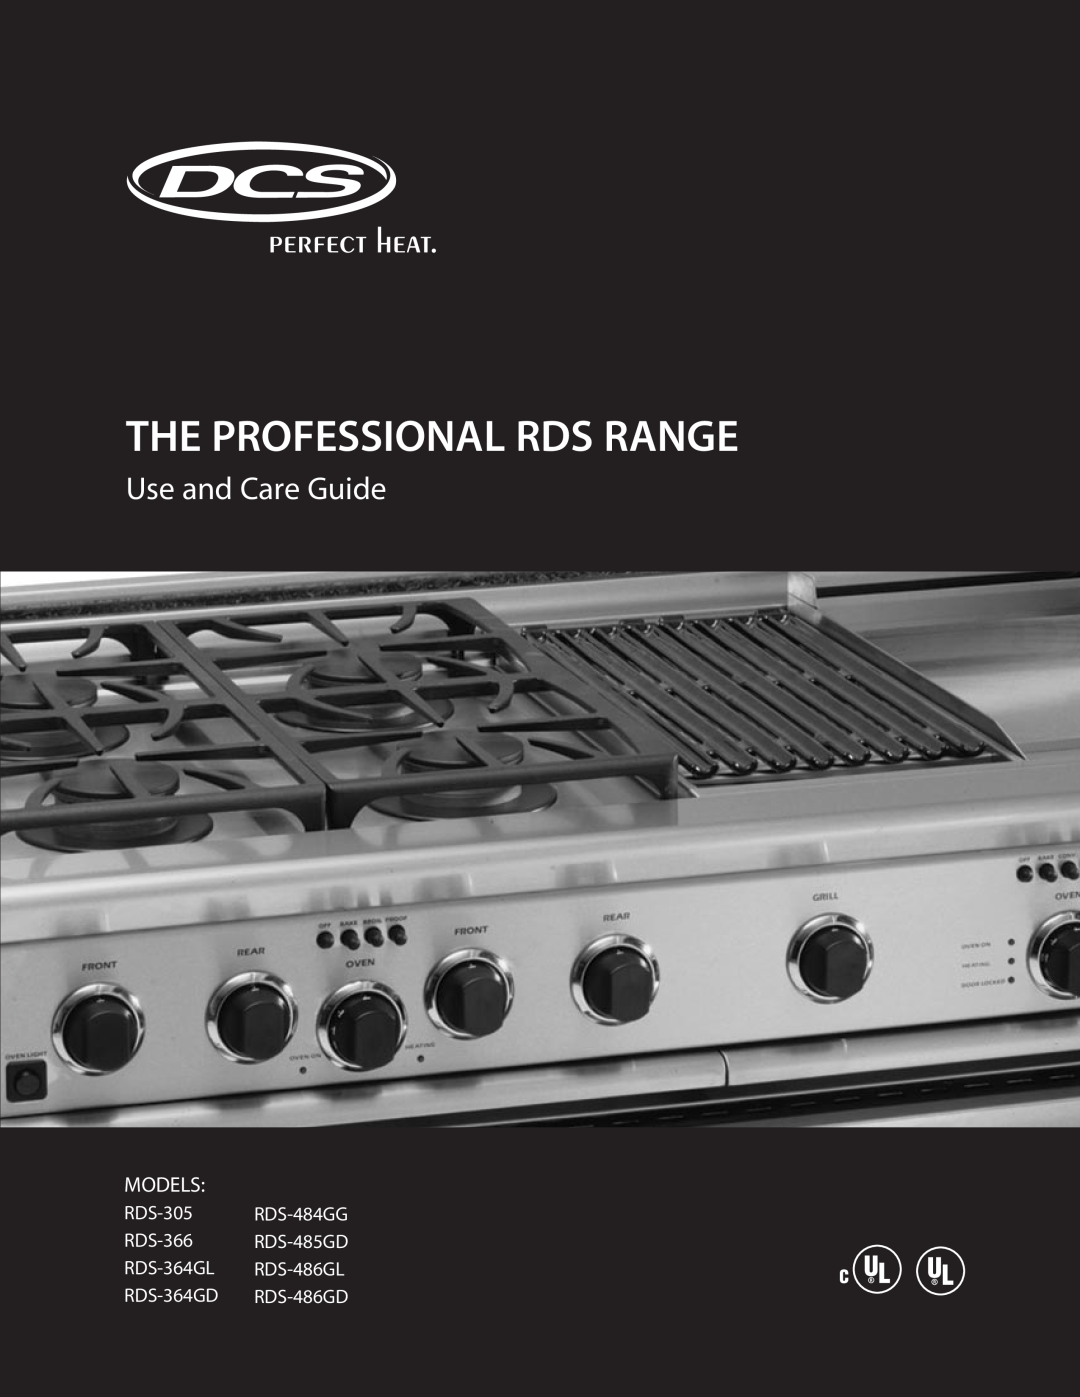 DCS RDS-305 manual The Professional Rds Range, Use and Care Guide, Models, RDS-364GD RDS-486GD 